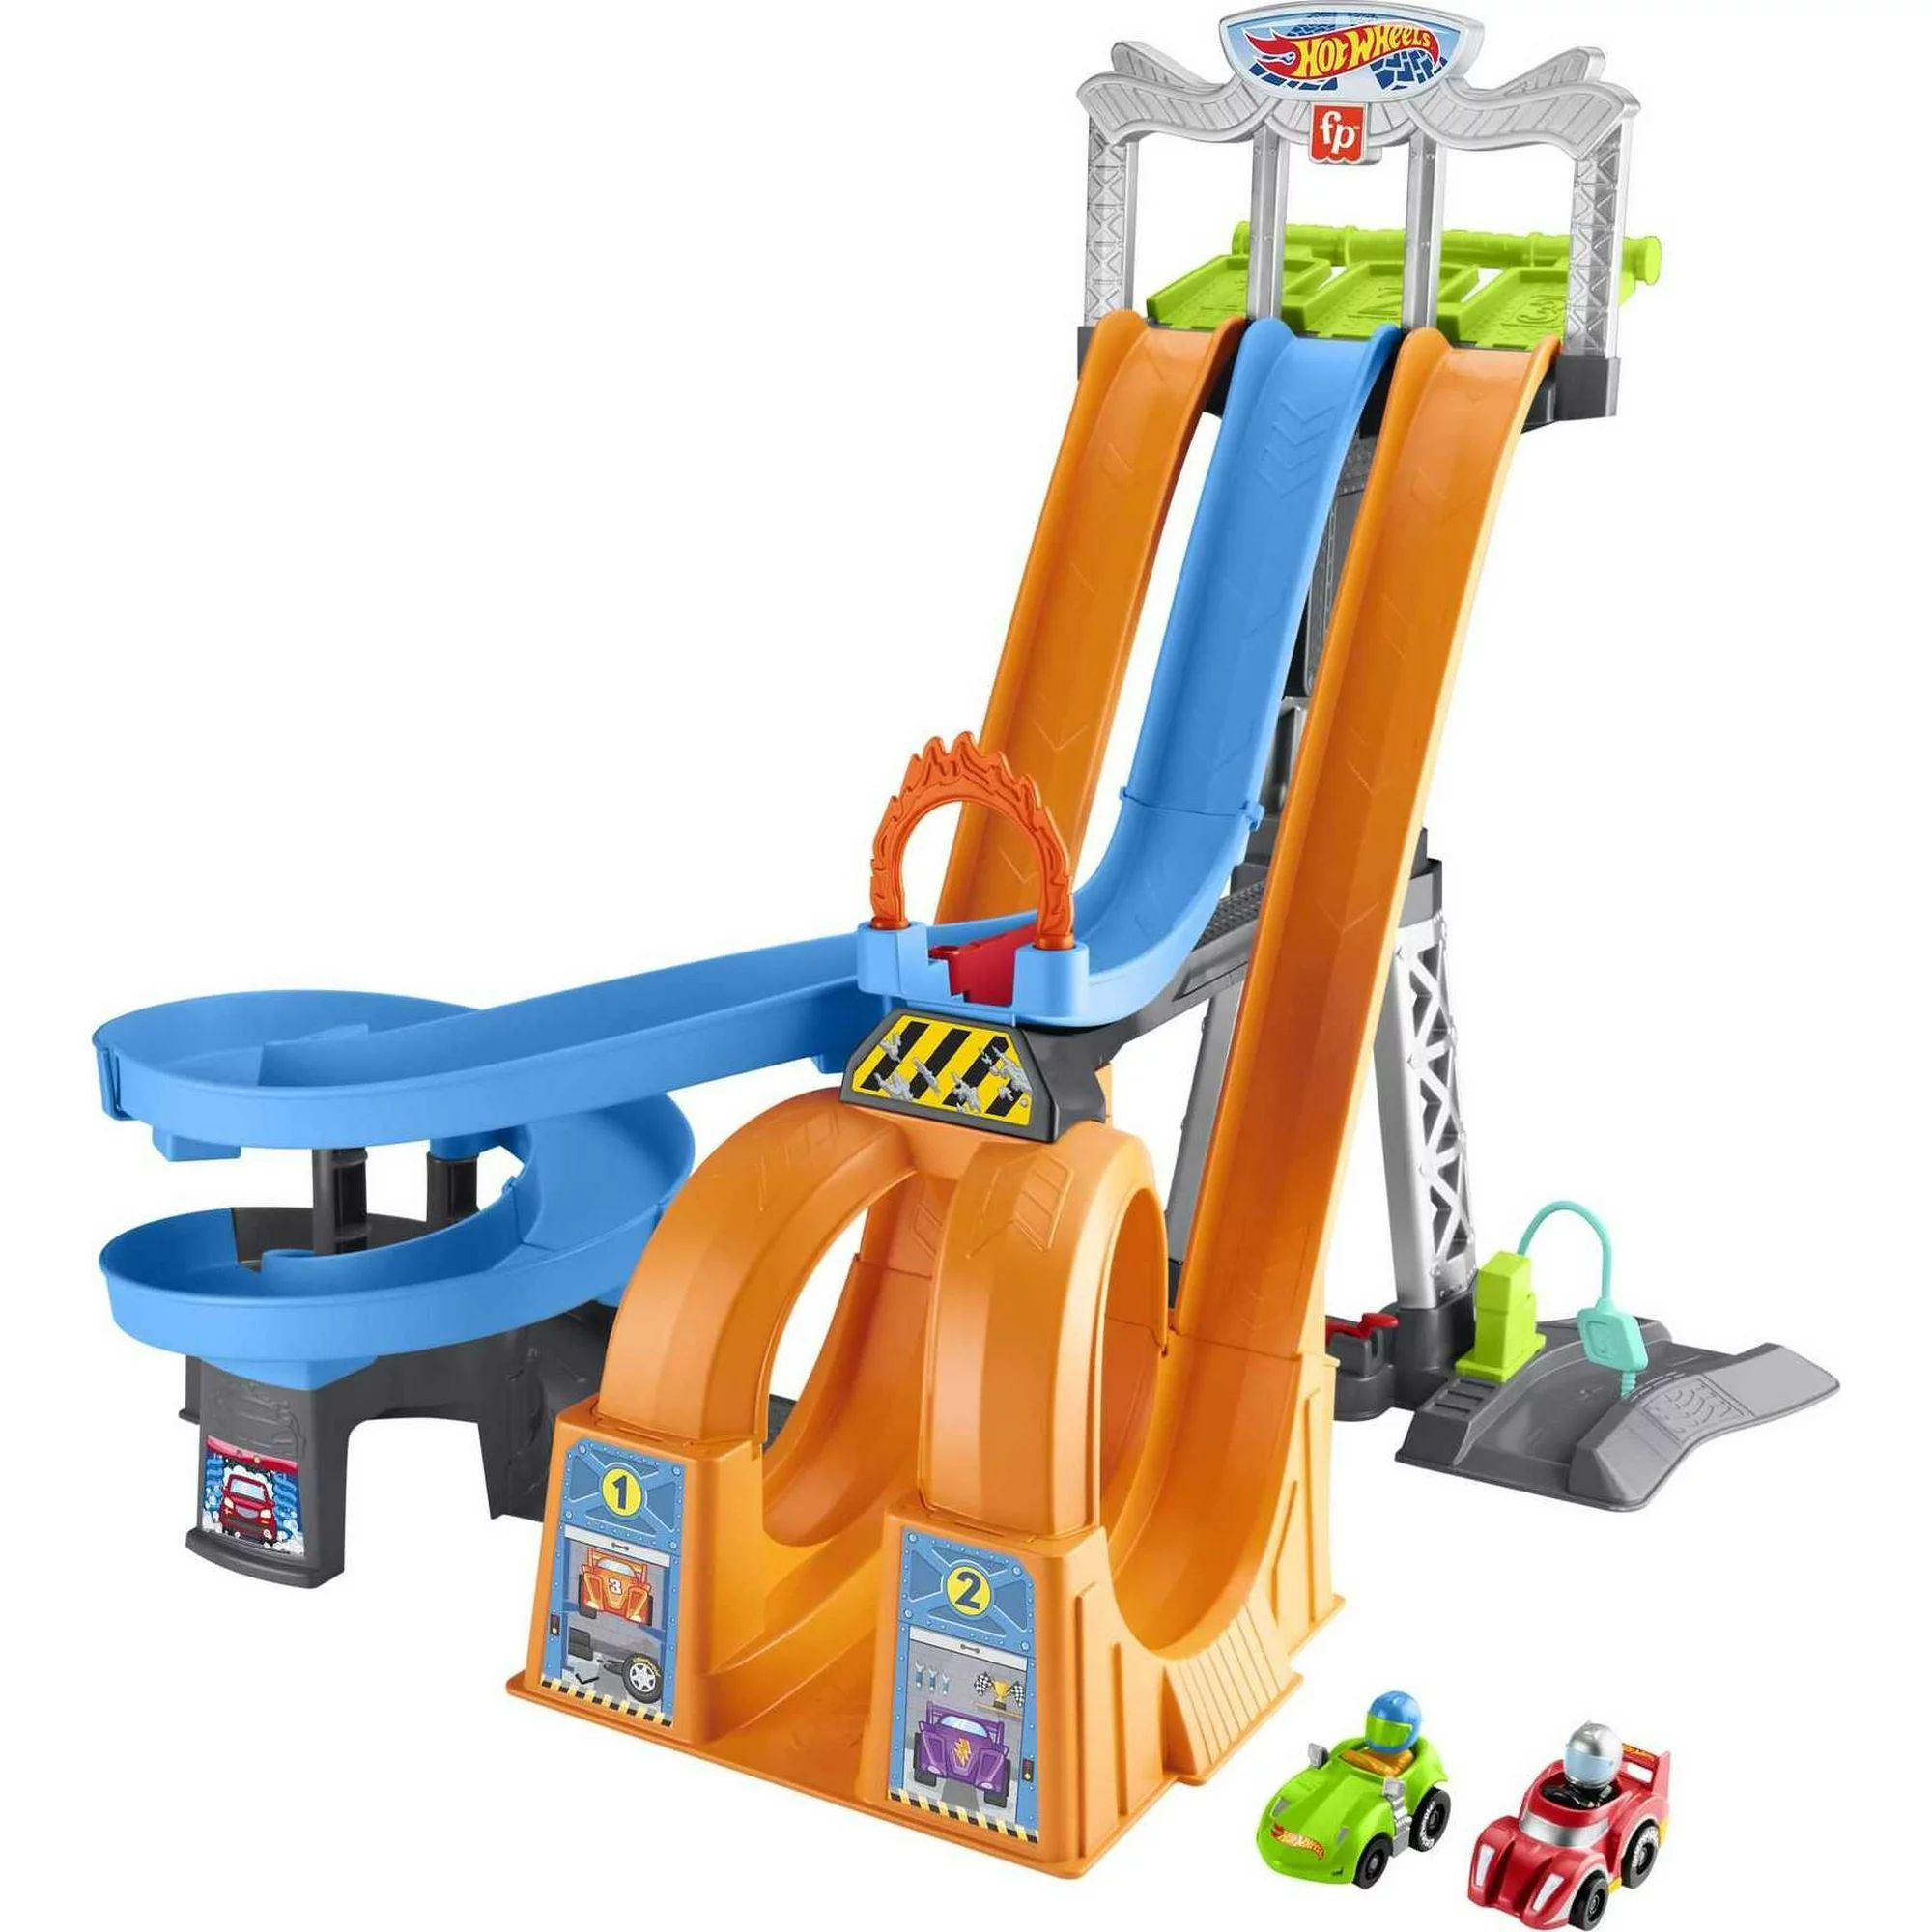 Little People Hot Wheels Racing Loops Tower Toddler Vehicle Playset with Sounds & 2 Toy Cars | Walmart (US)